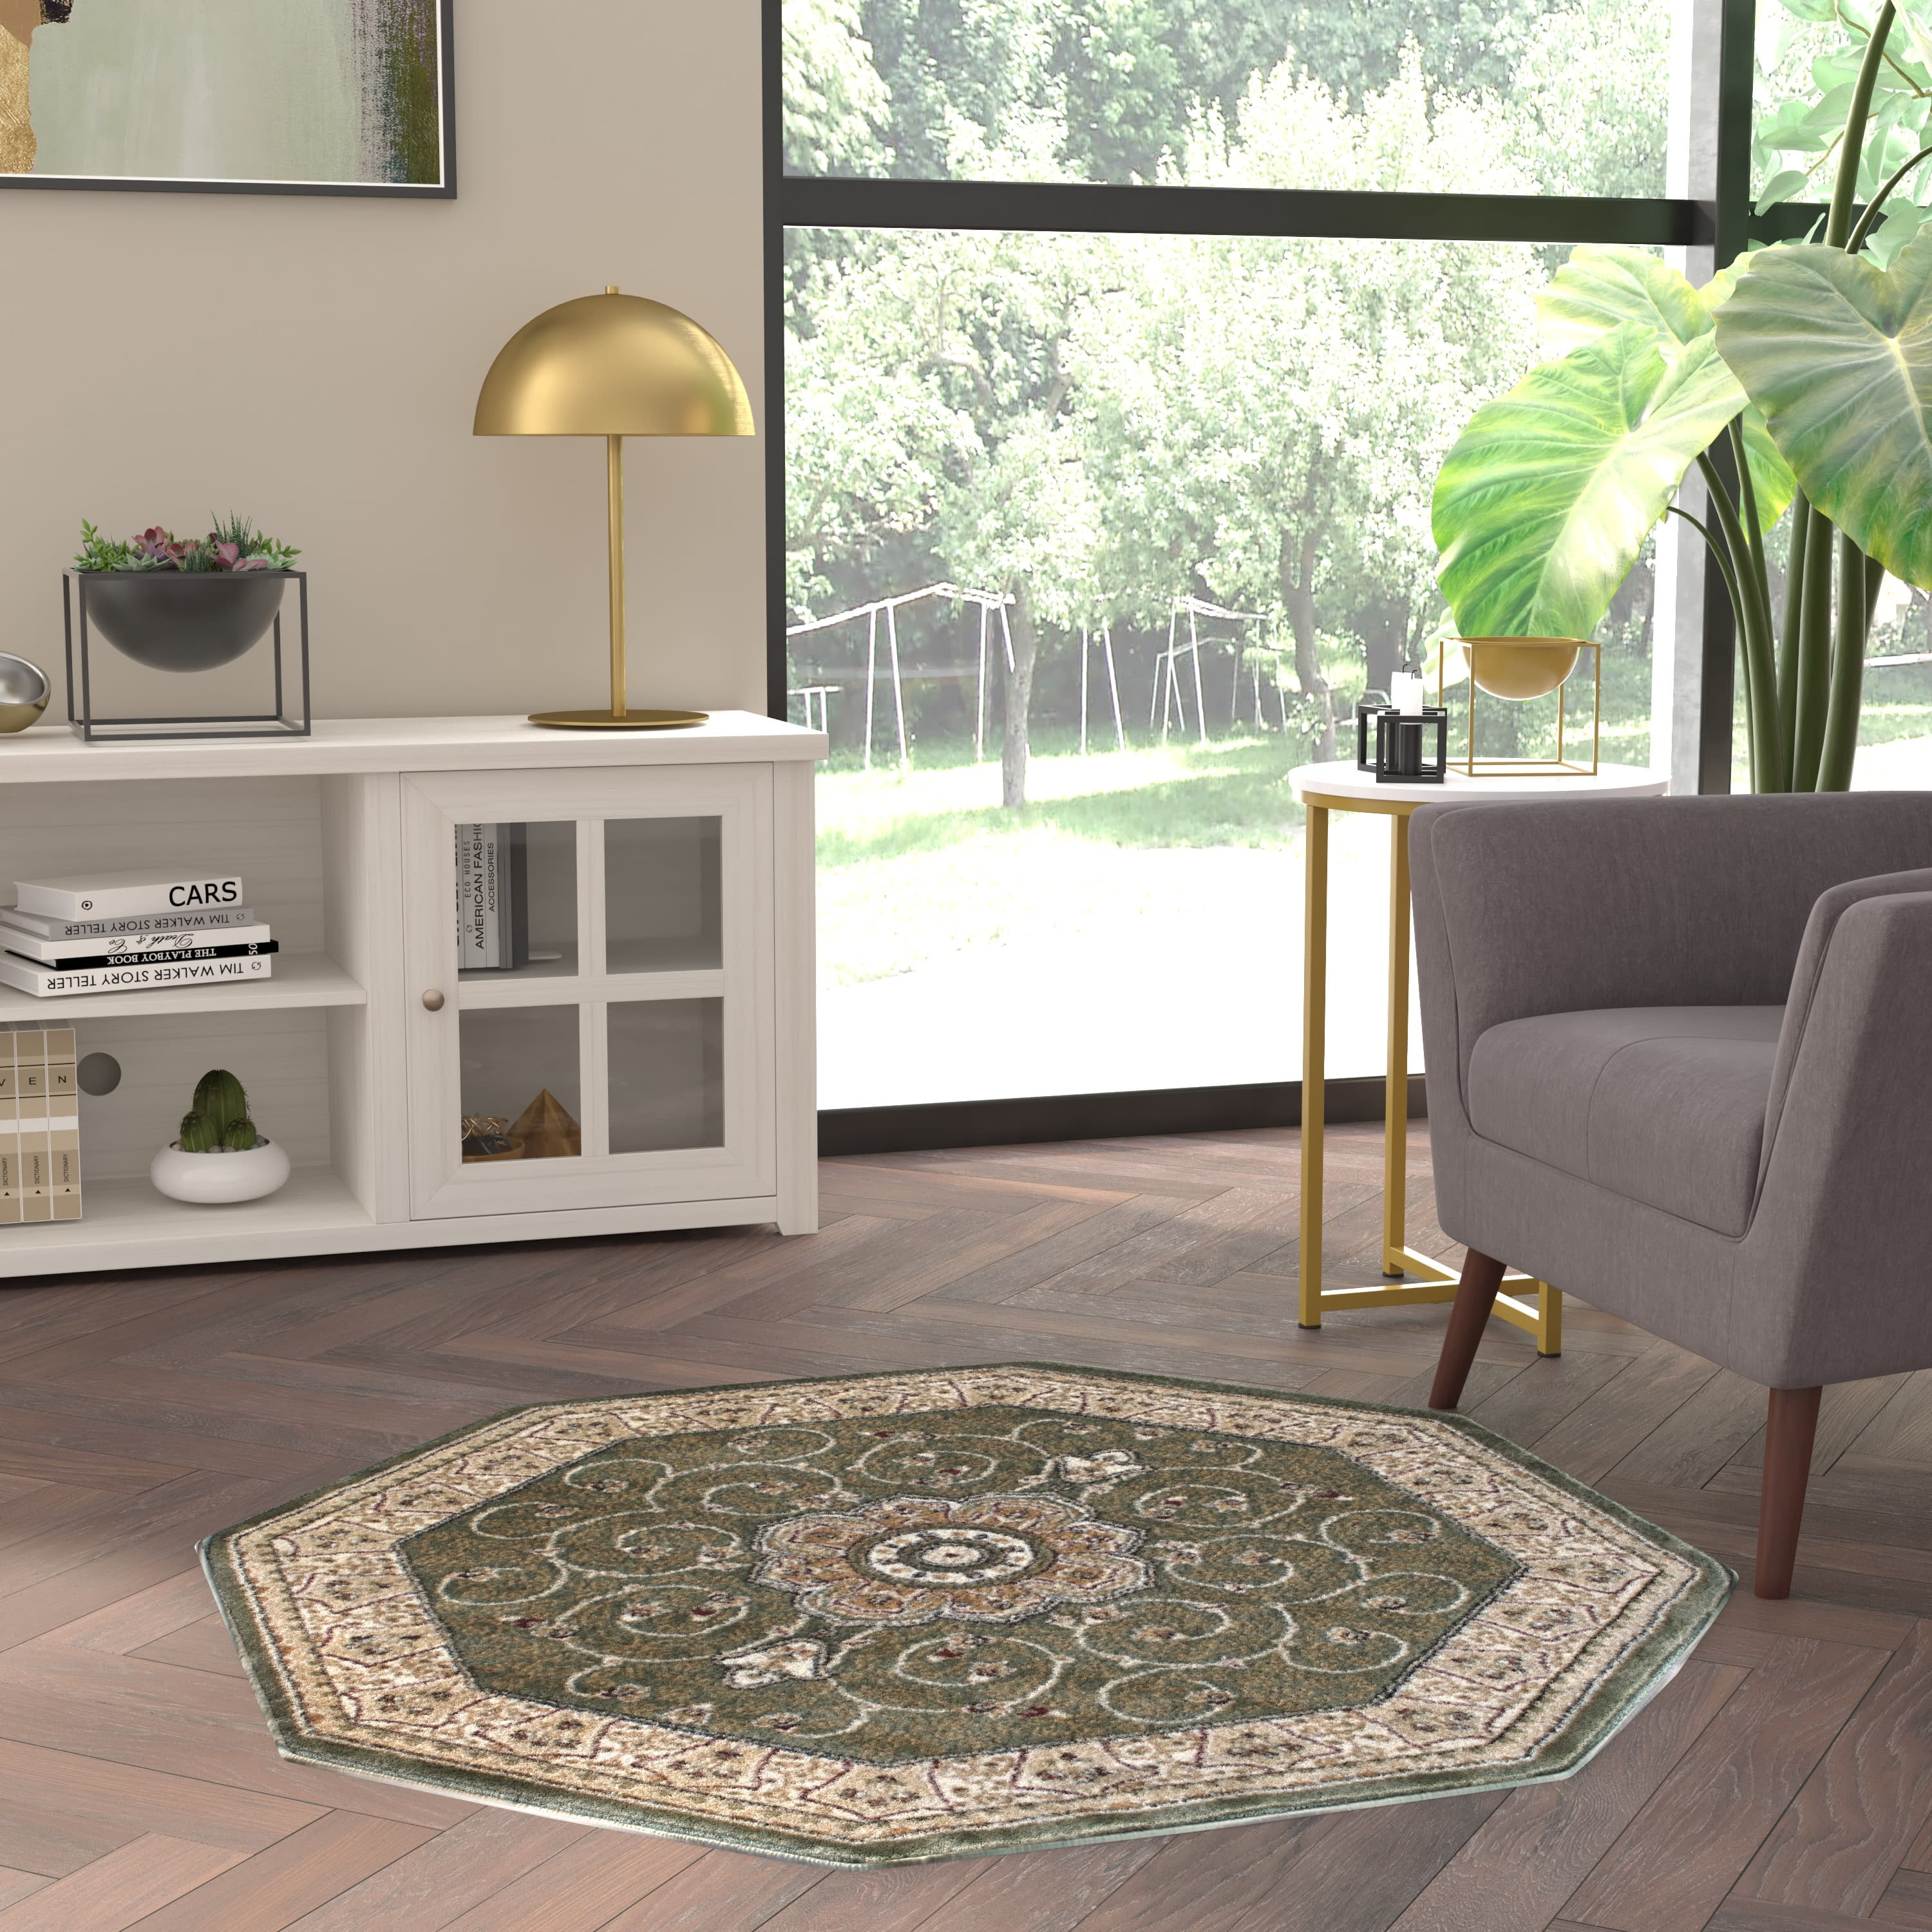 Emma Oliver 4x4 Green Octagon Accent Rug With Elegant Fl Medallion Center And Vine Accents In Beige Burdy Ivory Com